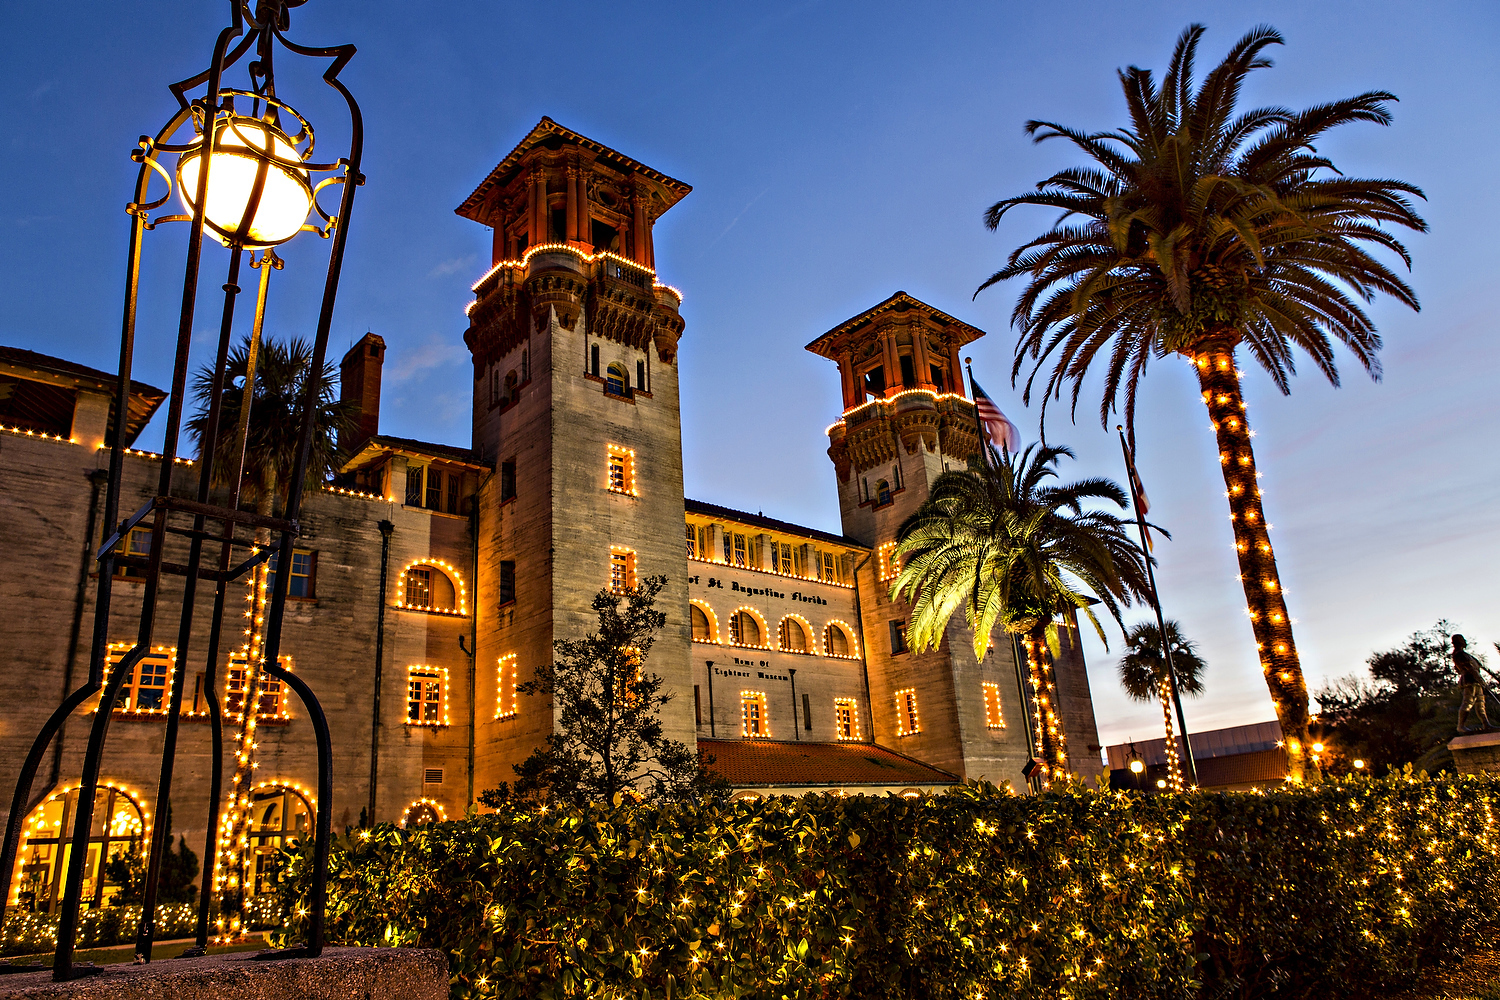  Christmas lights decorate the Lightner Museum in St. Augustine, Florida. The building was originally the Alcazar Hotel. 